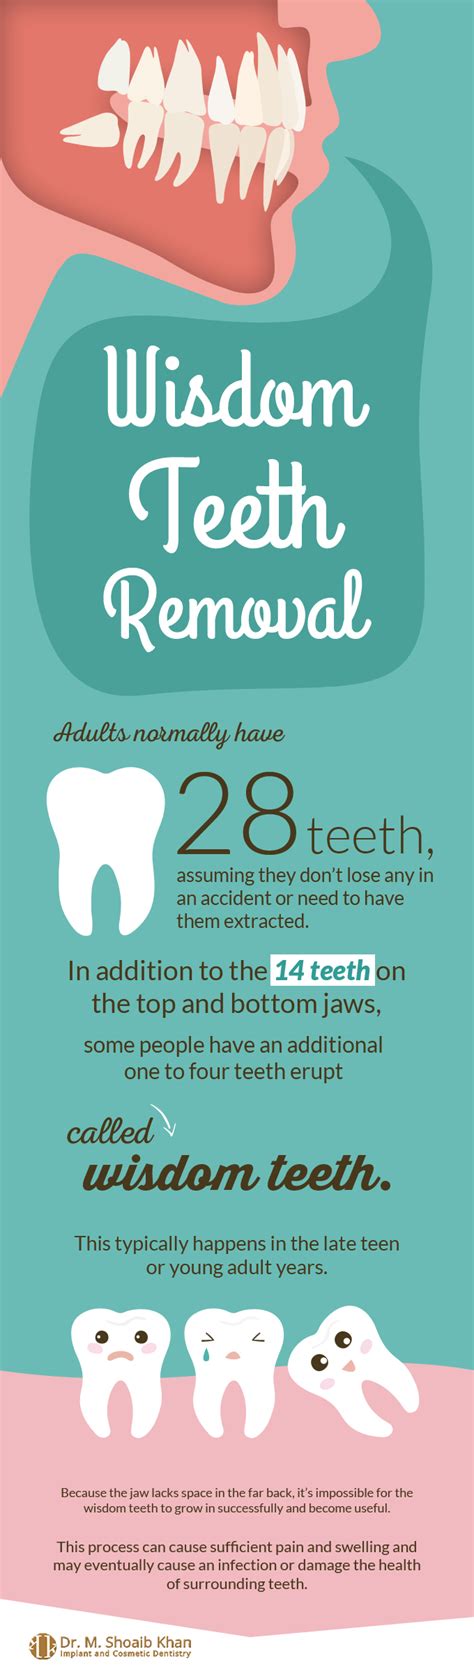 Facts About Wisdom Teeth Removal Dr M Shoaib Khan